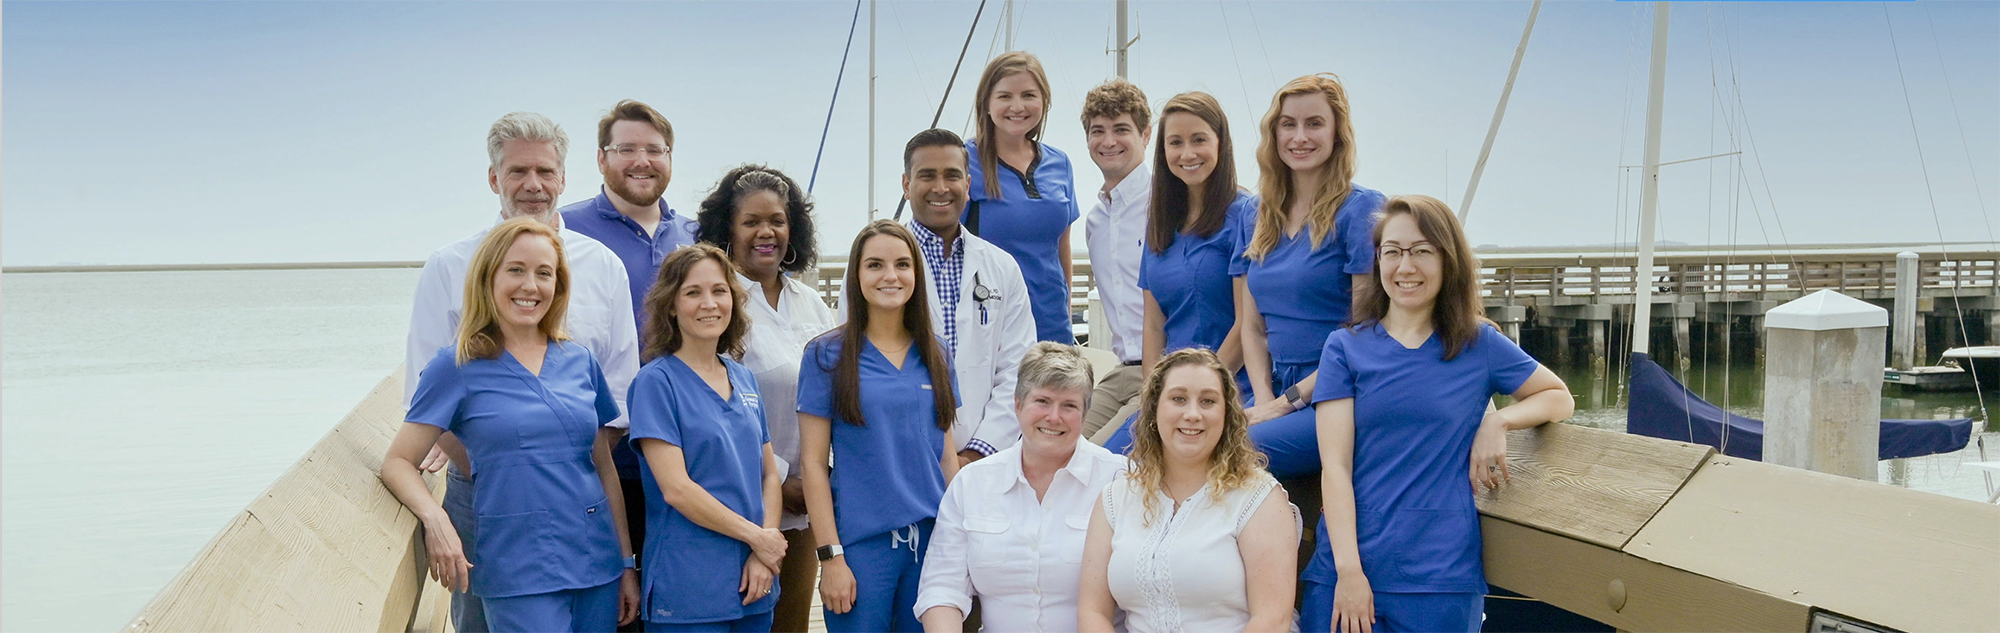 Meet Our Team - Owners & Providers - Coastal Care Partners